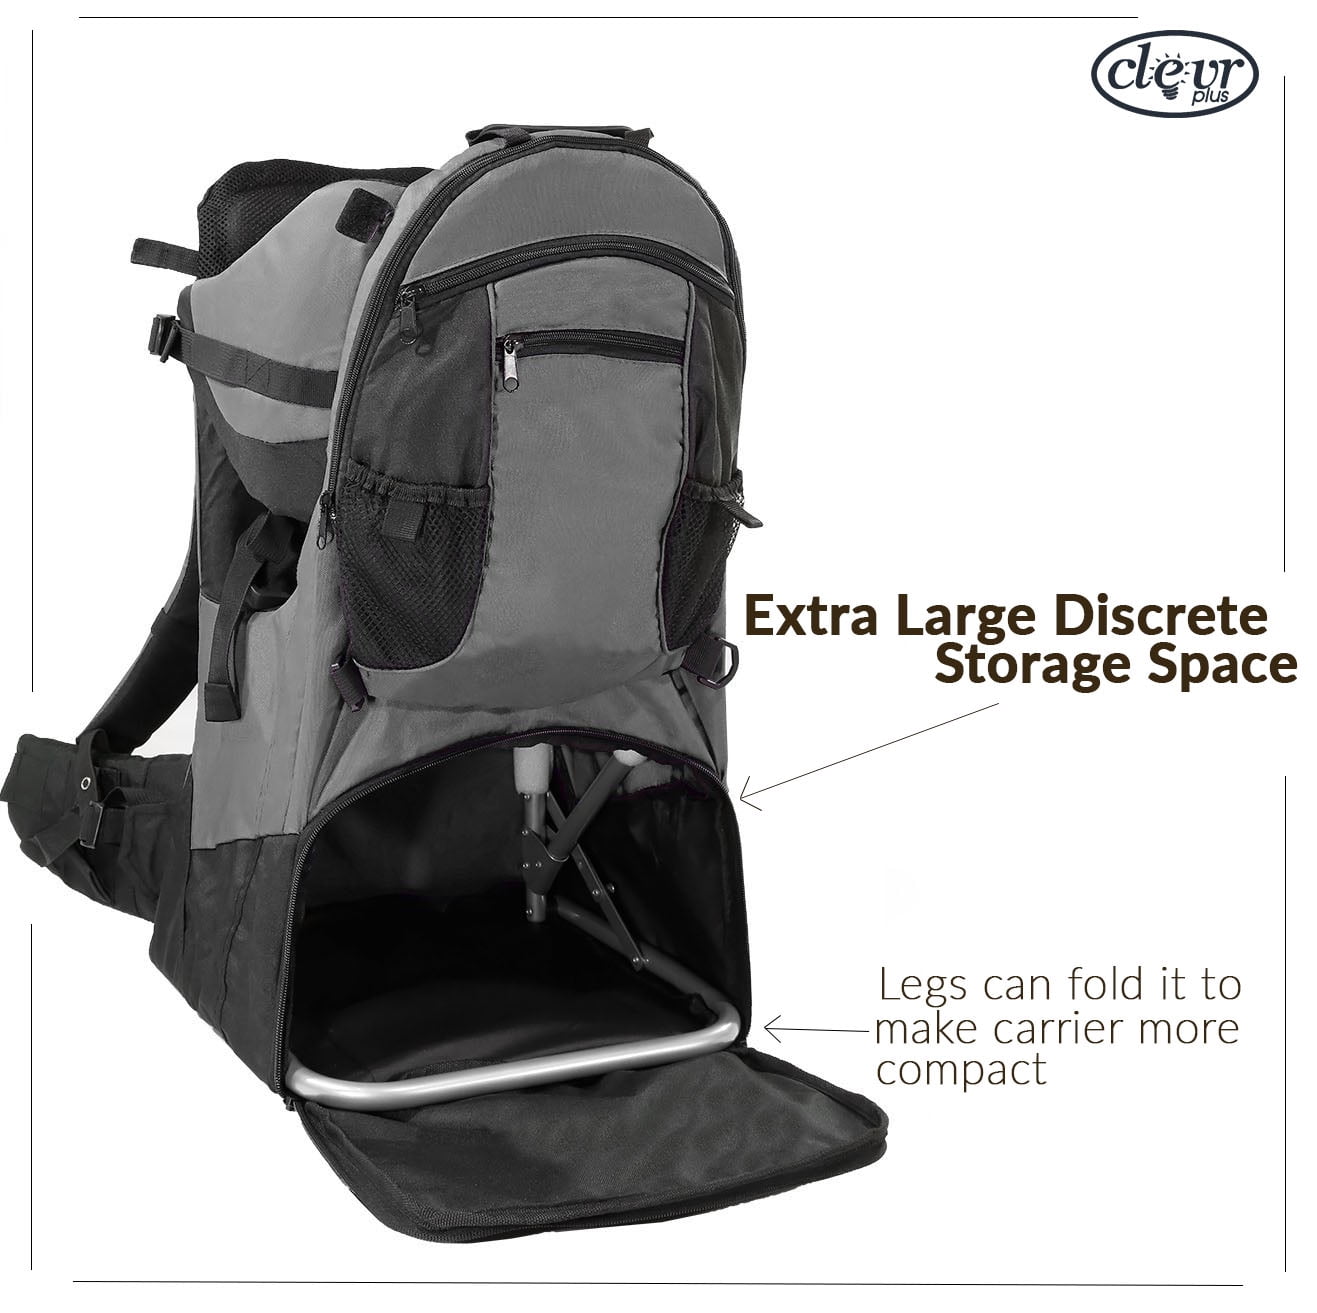 clevr cross country baby backpack hiking carrier